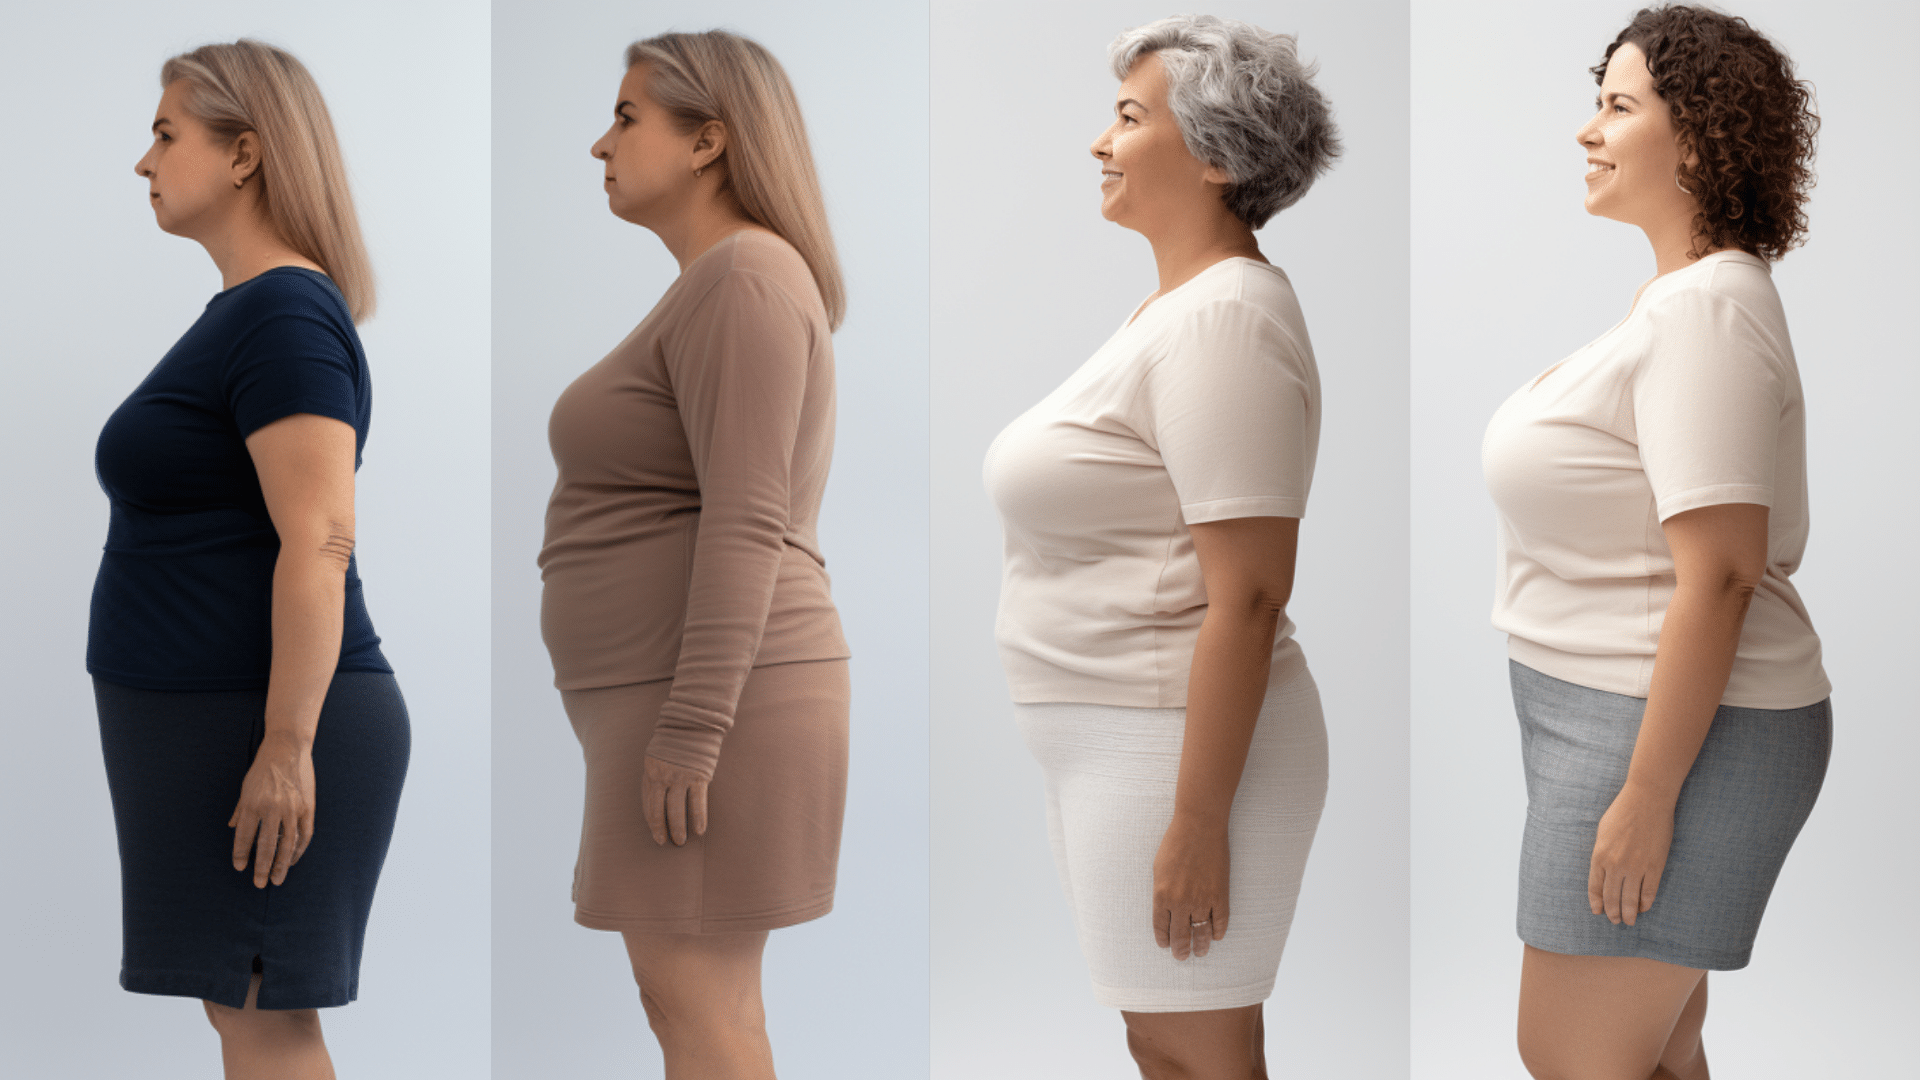 full profile of 4 standing women between the ages of 50 to 70. full-body shot, side view.